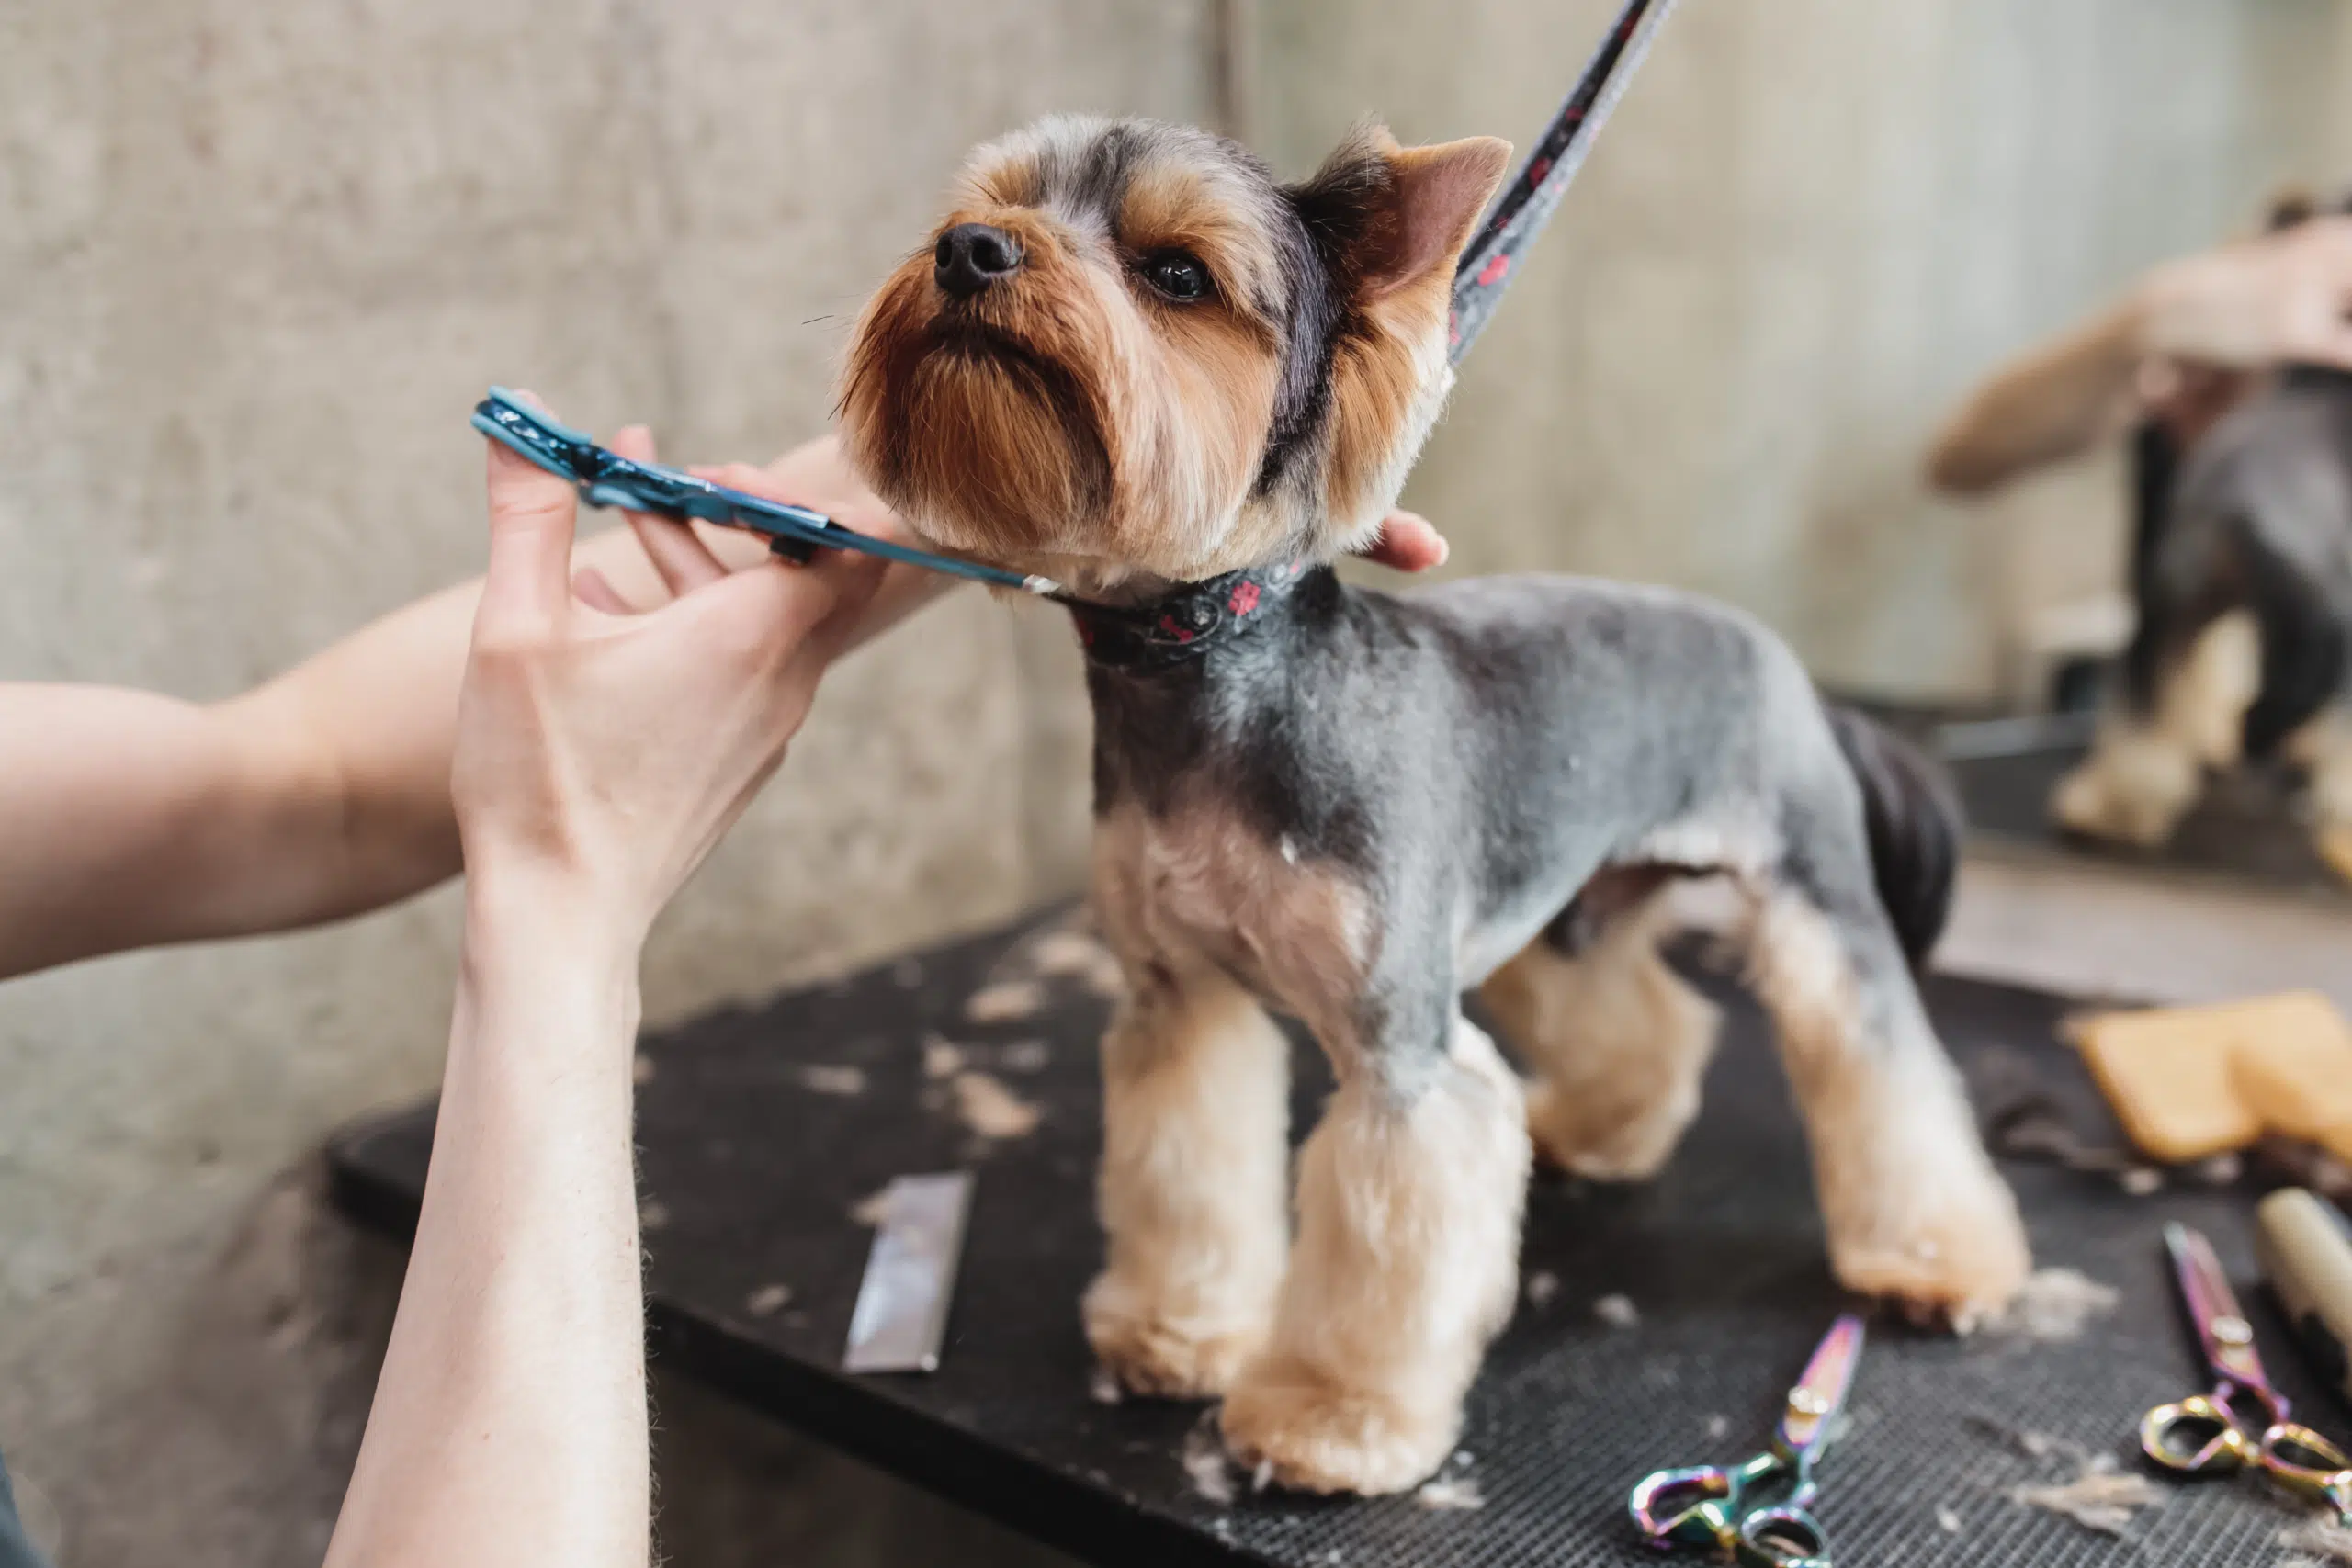 An image showing a professional dog grooming session for a small dog breed